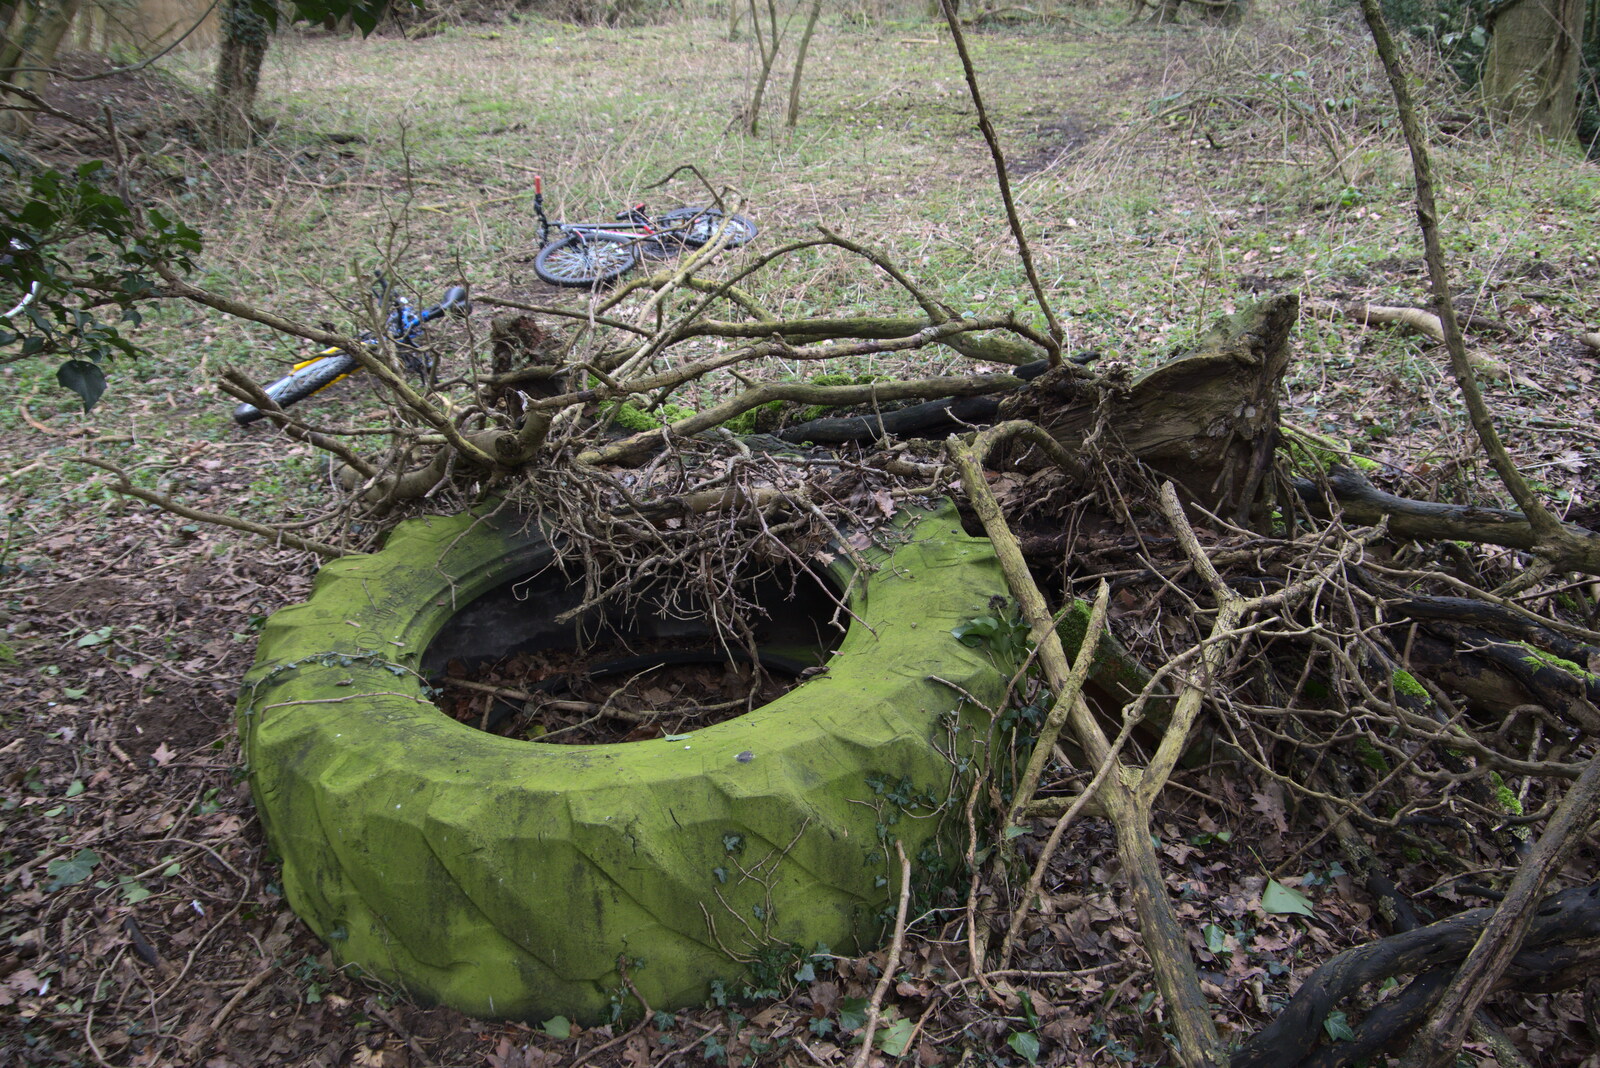 A green tractor tyre from The Old Sewage Works, The Avenue, Brome, Suffolk - 20th February 2021